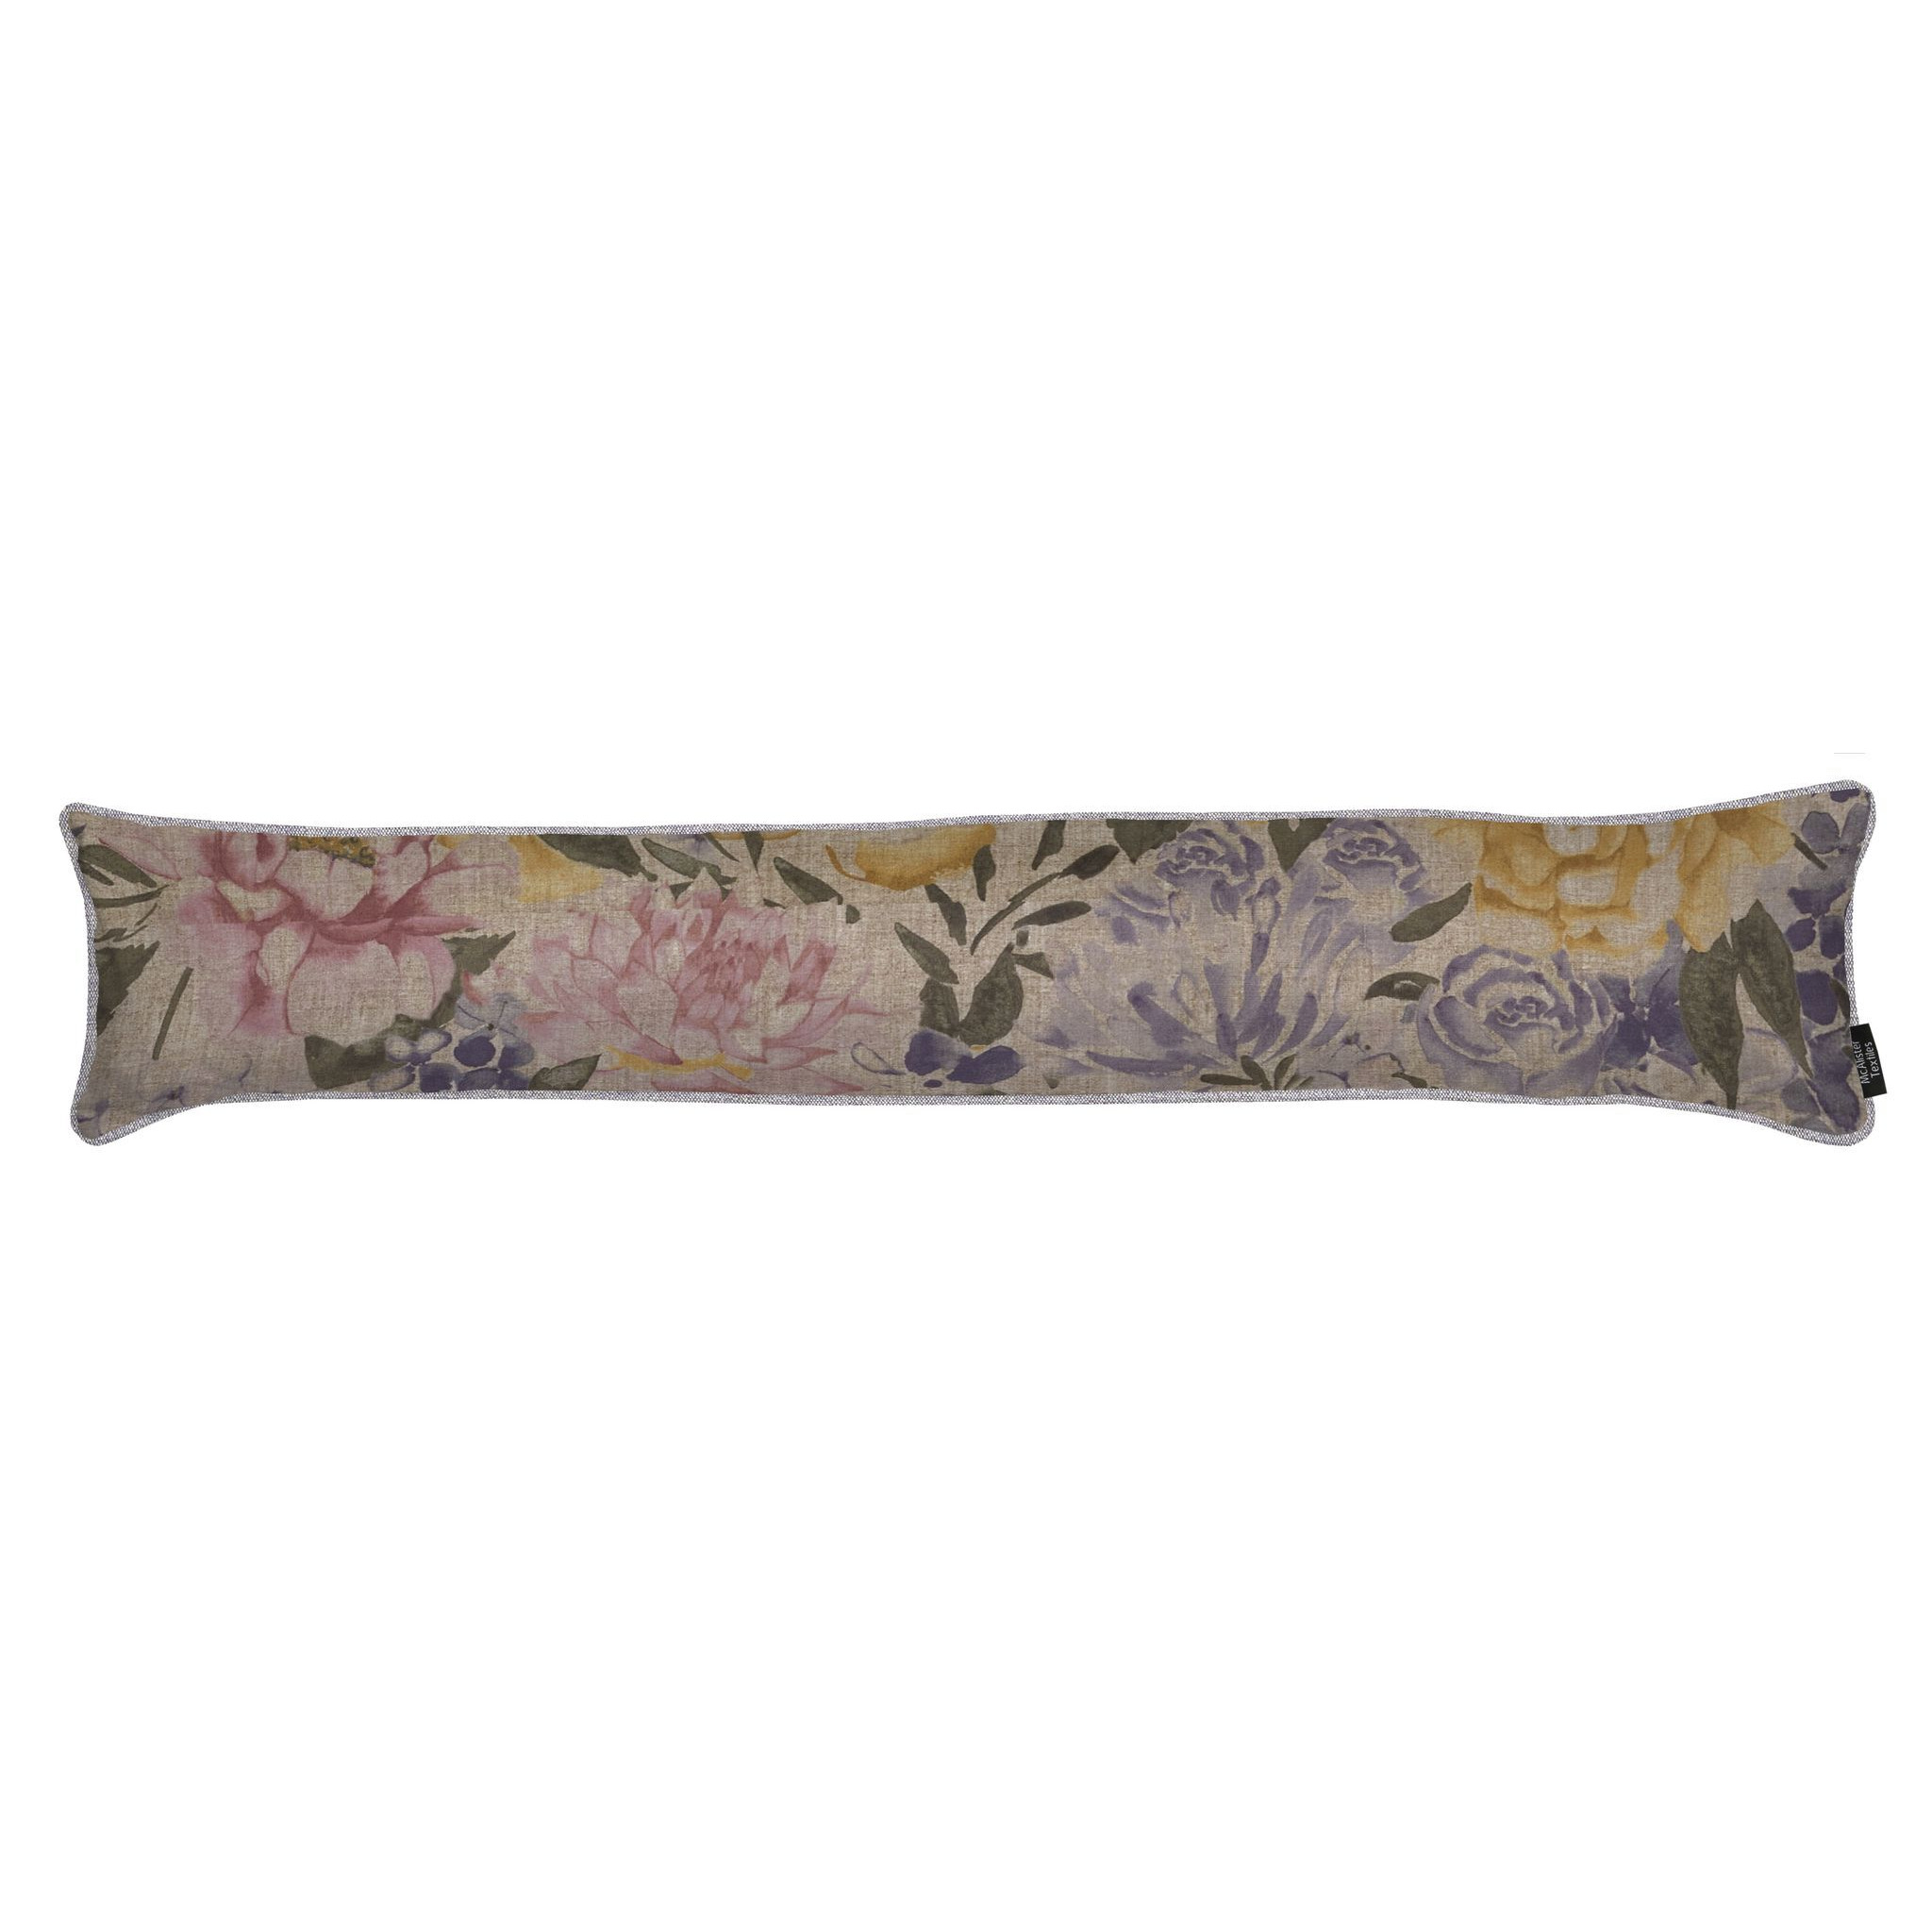 Blooma Purple, Pink and Ochre Floral Draught Excluder, 18cm x 90cm